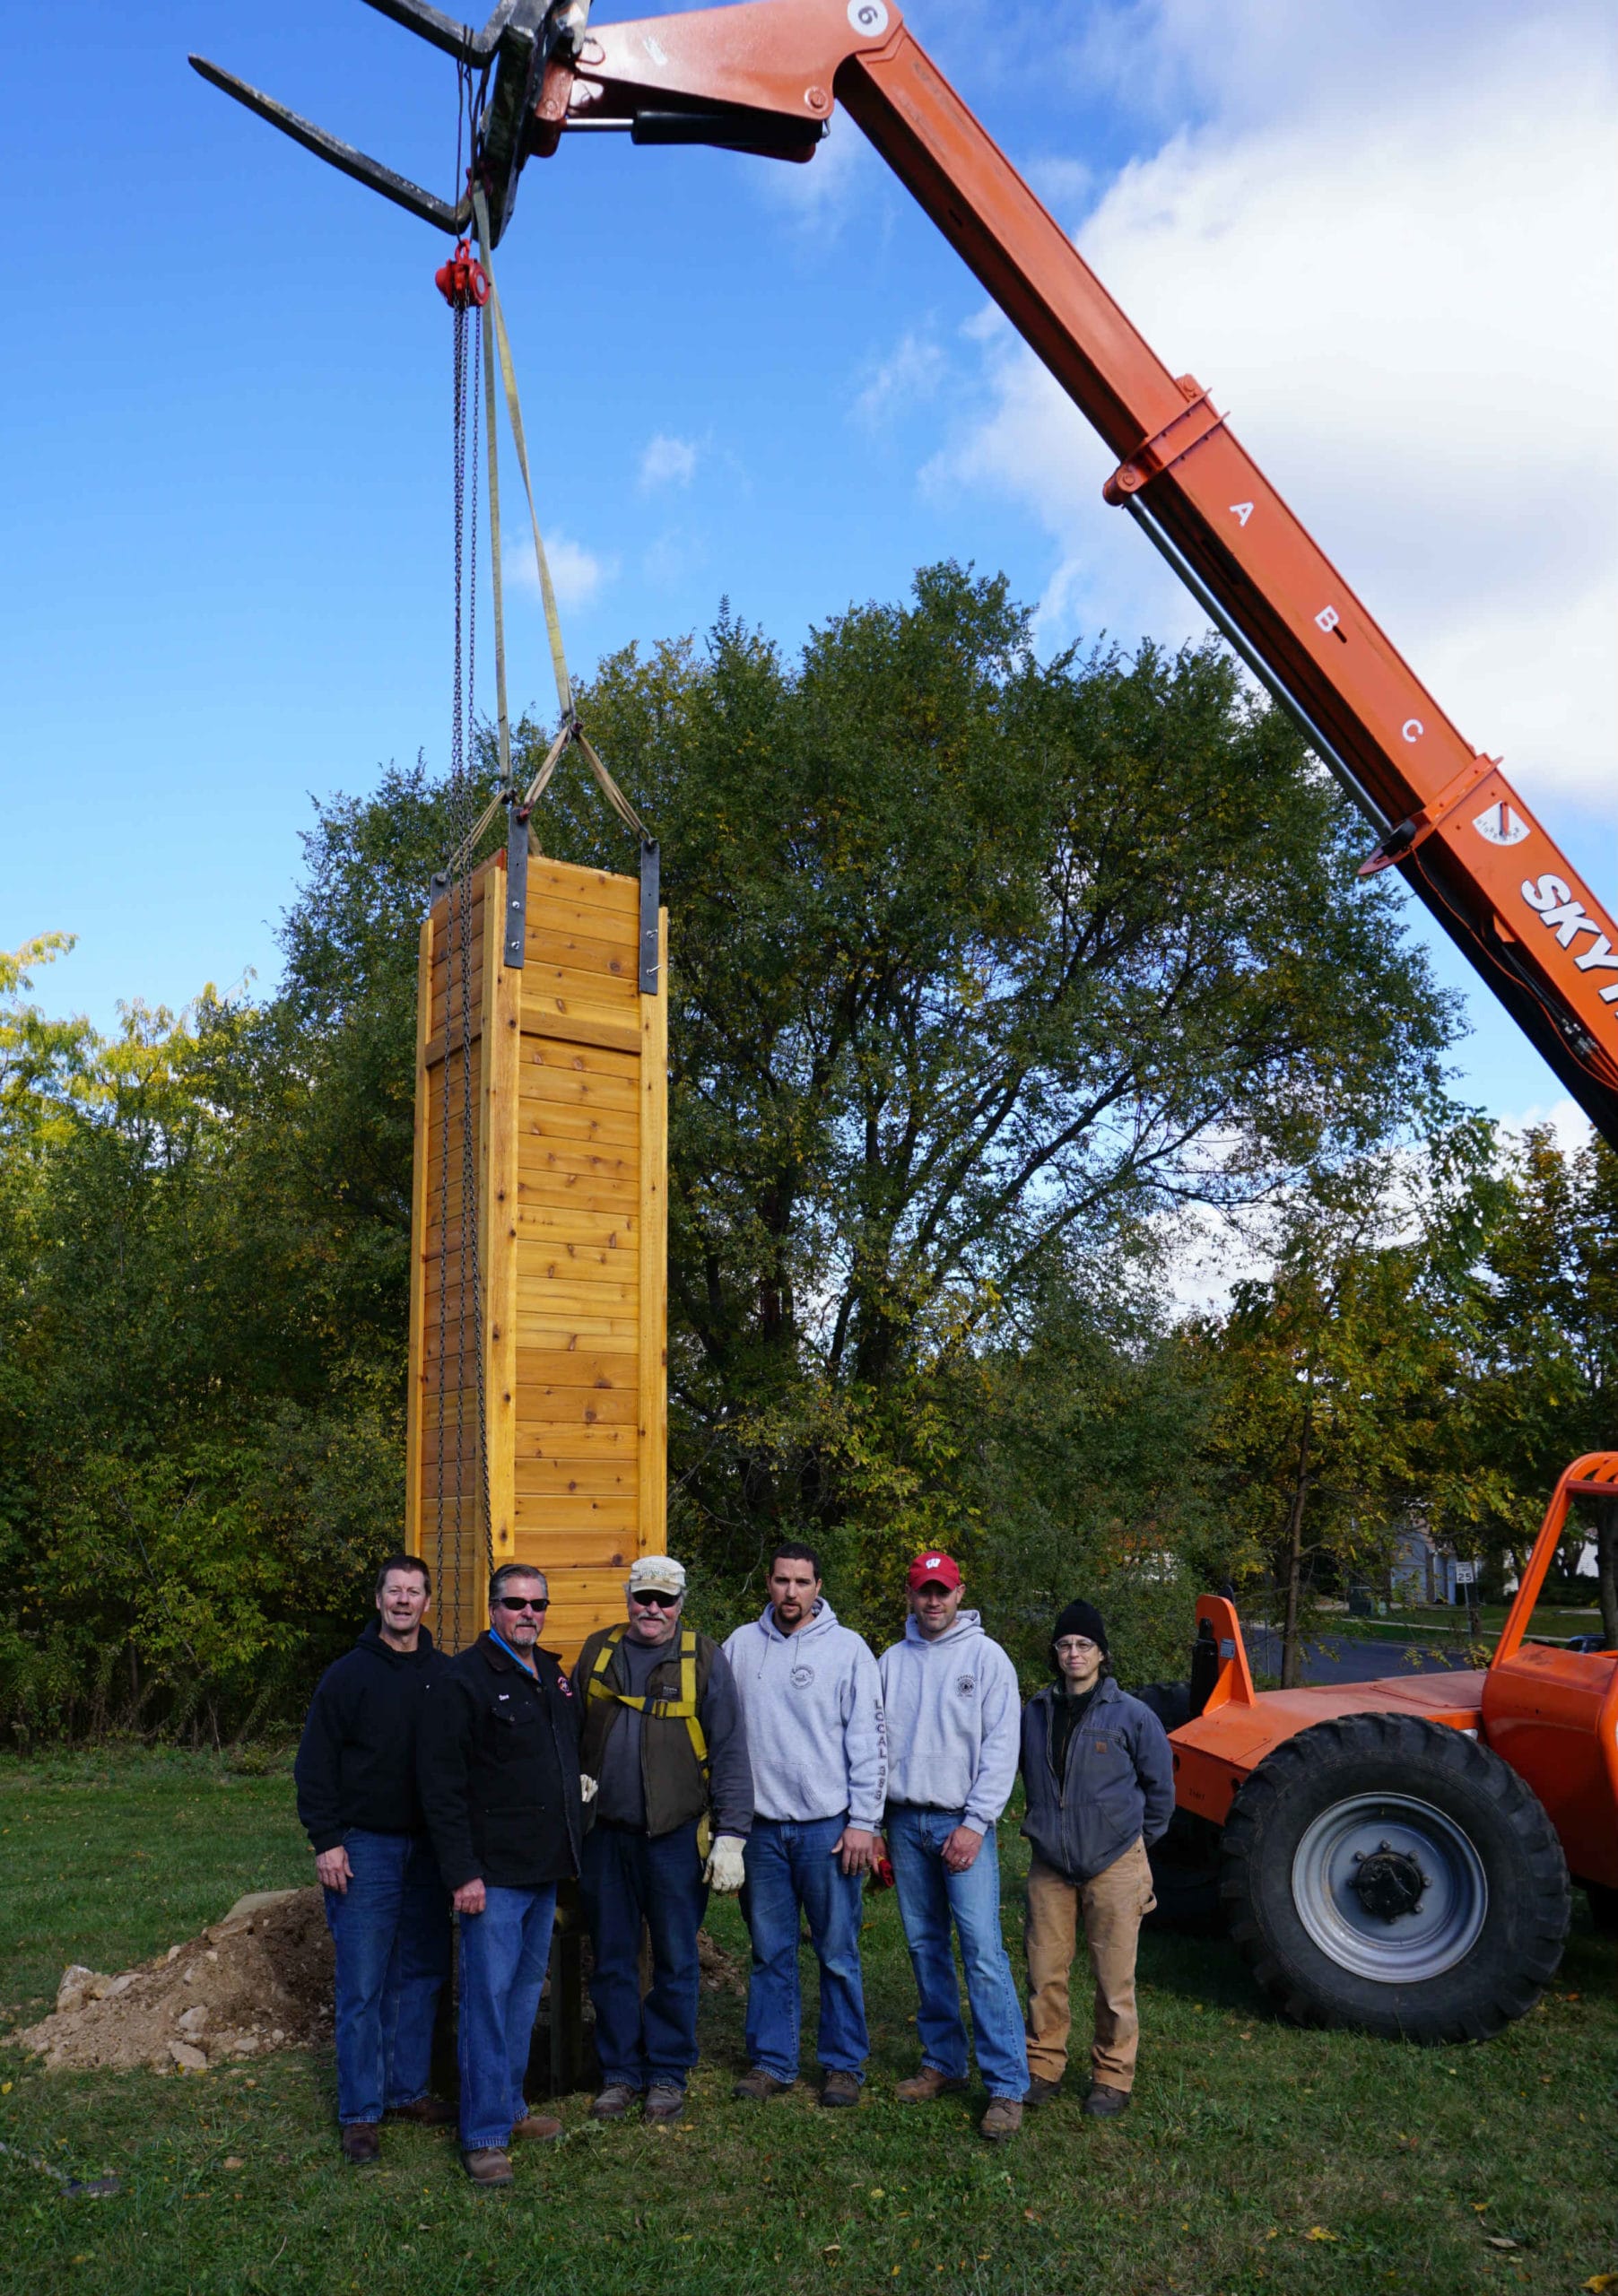 Building & Construction Trades Council of South Central Wisconsin volunteers built and installed a chimney swift roosting tower at Cherokee Park in Madison, Wisconsin.